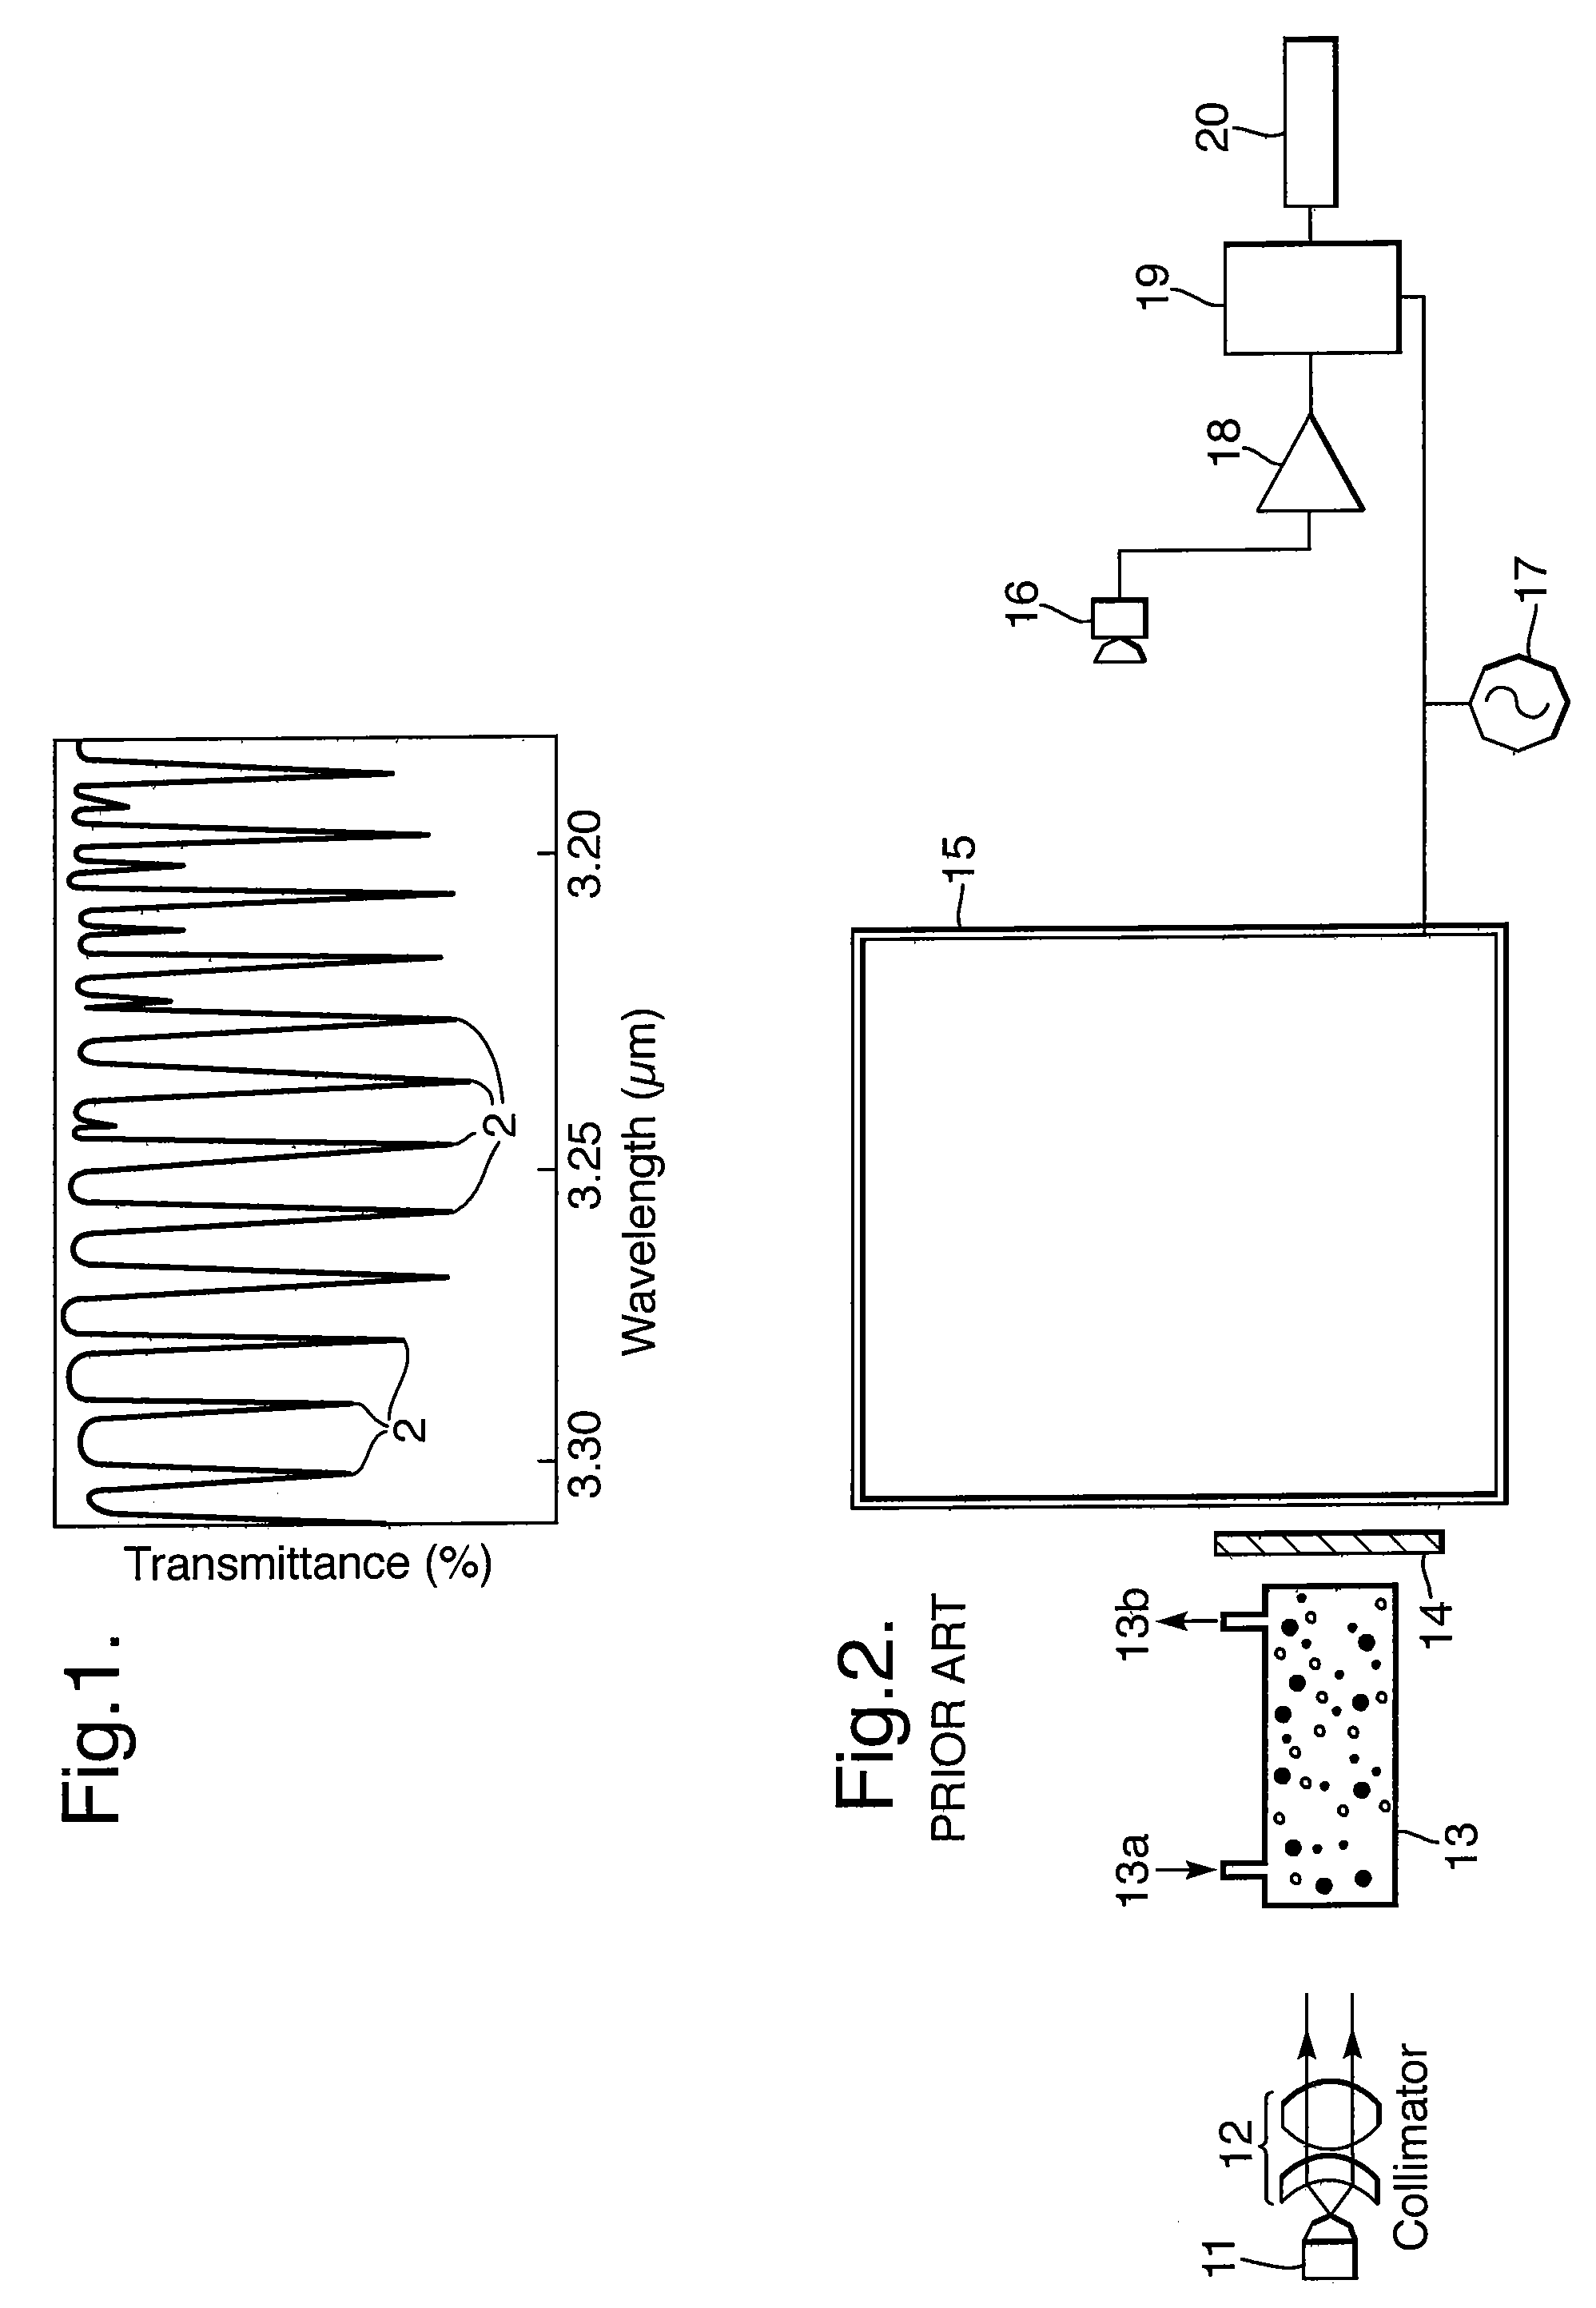 Optical absorption spectrometer and method for measuring concentration of a substance